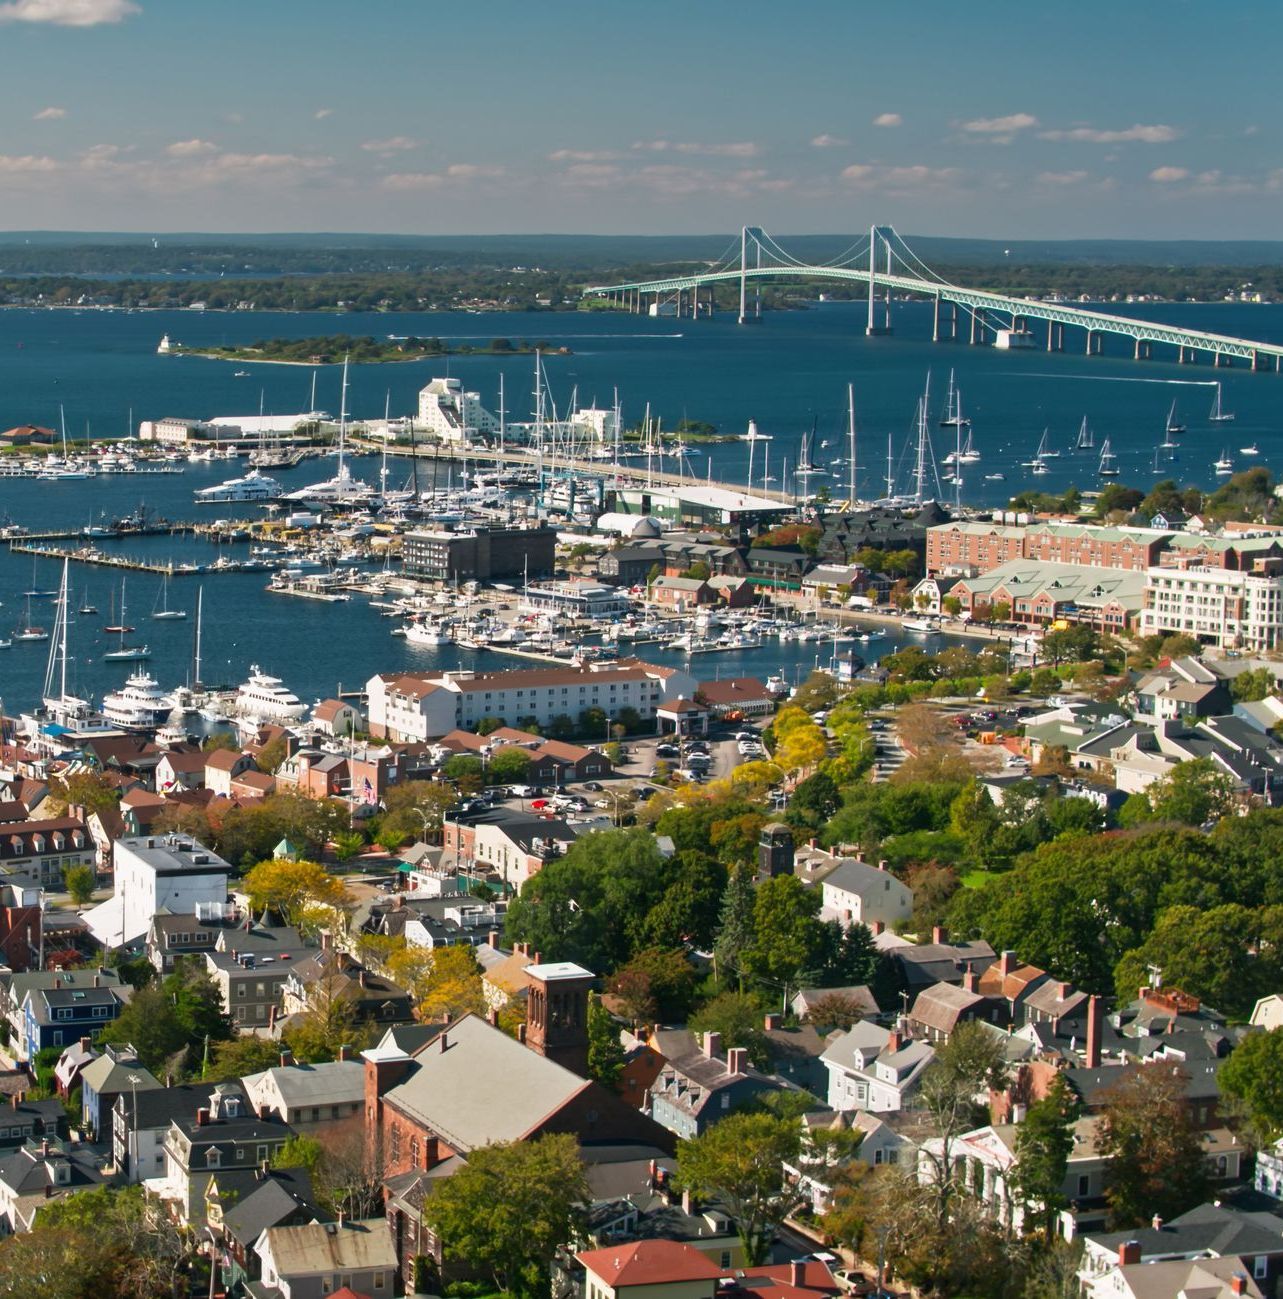 an aerial view of a city with boats in the water in Newport RI